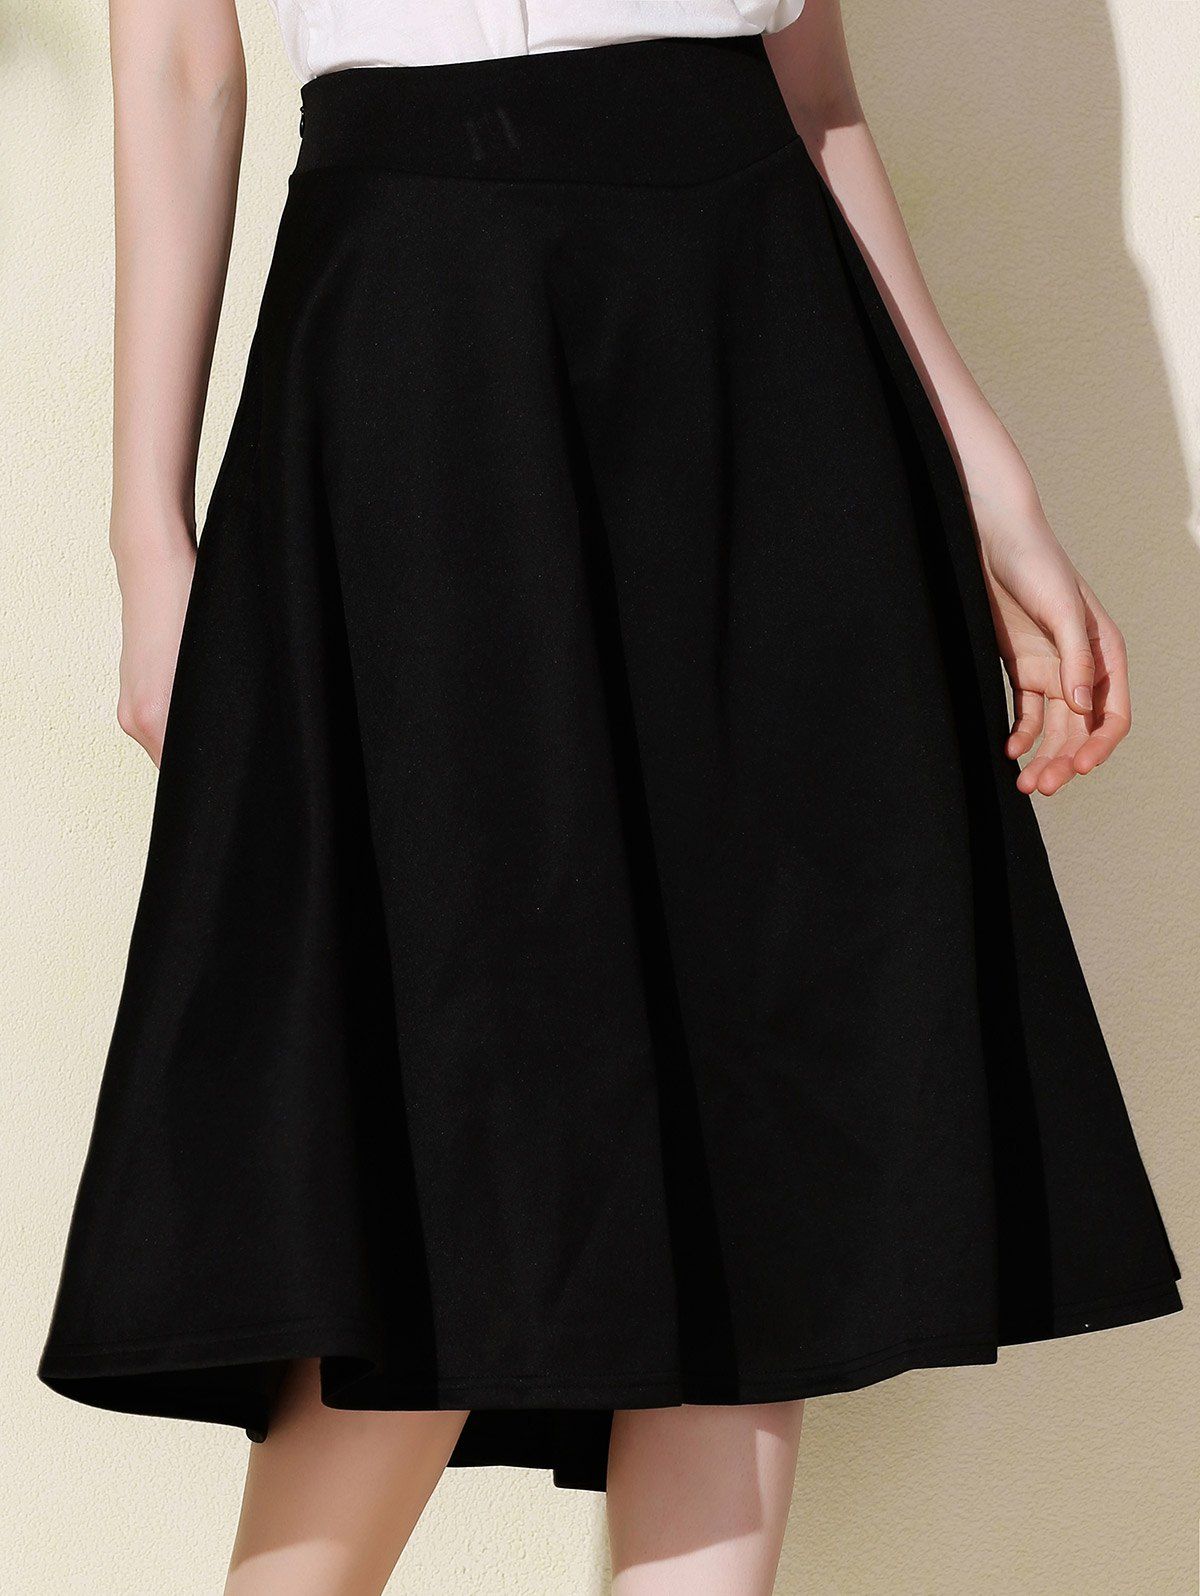 2018 Stylish High-Waisted A-Line Solid Color Women's Midi Skirt BLACK M ...